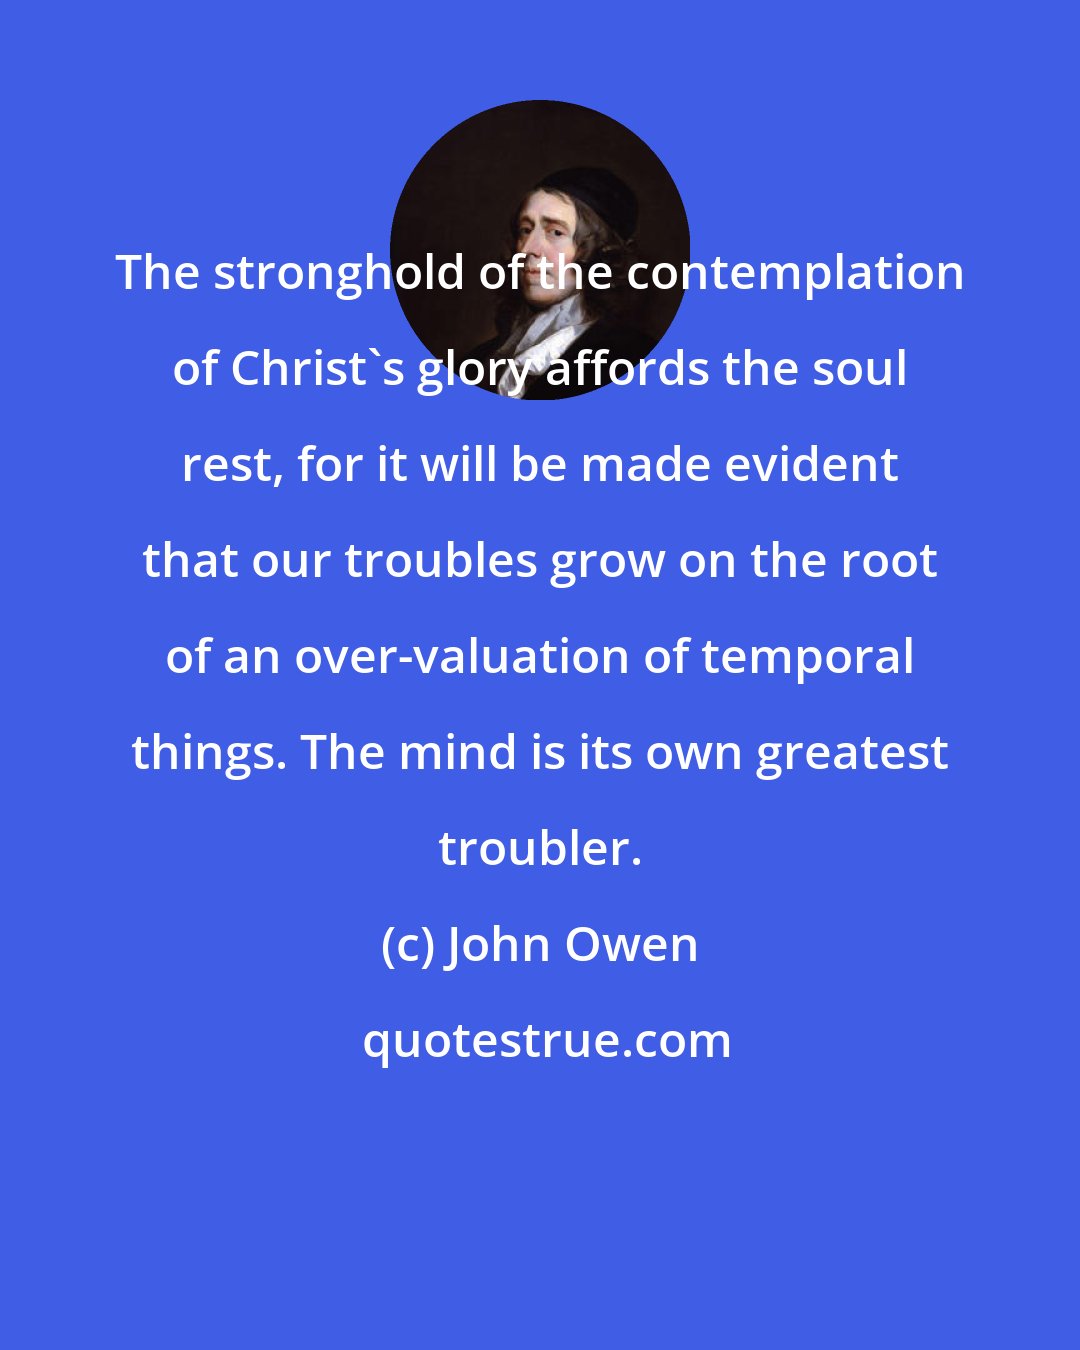 John Owen: The stronghold of the contemplation of Christ's glory affords the soul rest, for it will be made evident that our troubles grow on the root of an over-valuation of temporal things. The mind is its own greatest troubler.